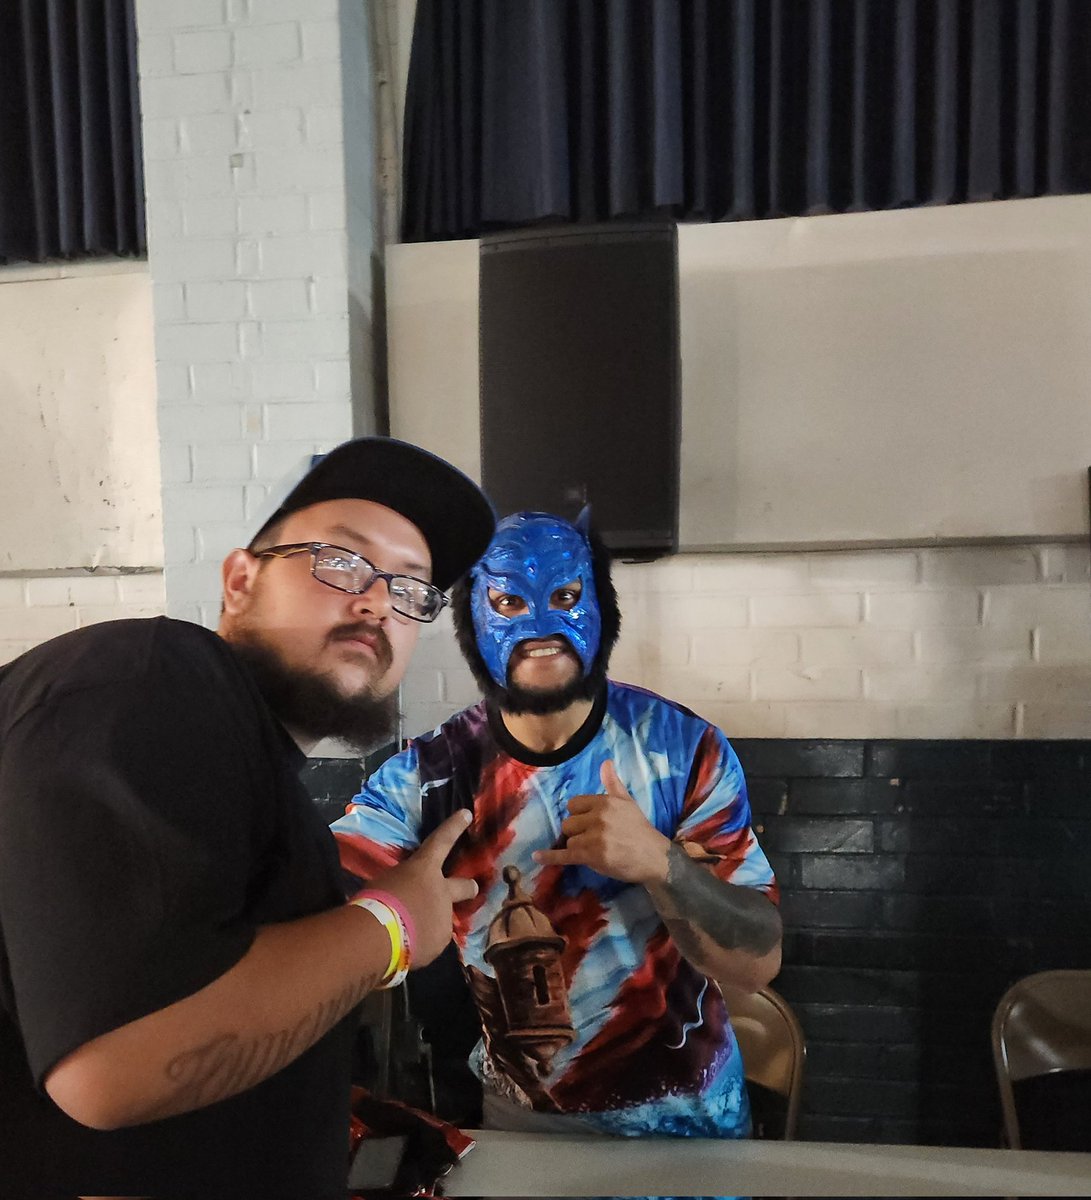 @LuchadorLD was awesome meeting you thank you for being super cool #Respect